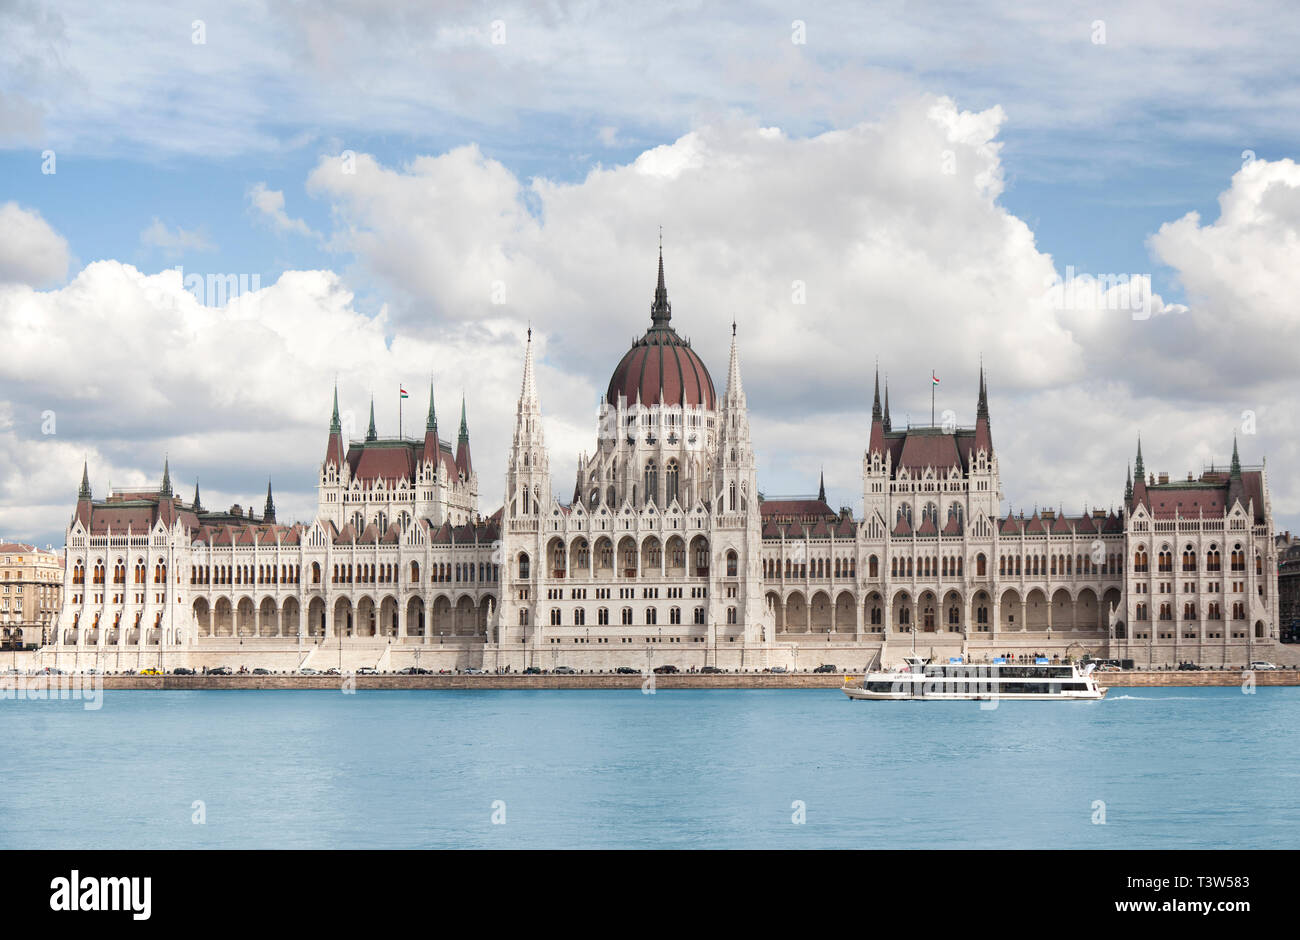 BUDAPEST, HUNGARY - SEPTEMBER 22, 2017: The Hungarian Parliament buidings as viewed from the Buda side of the Danube River. Stock Photo